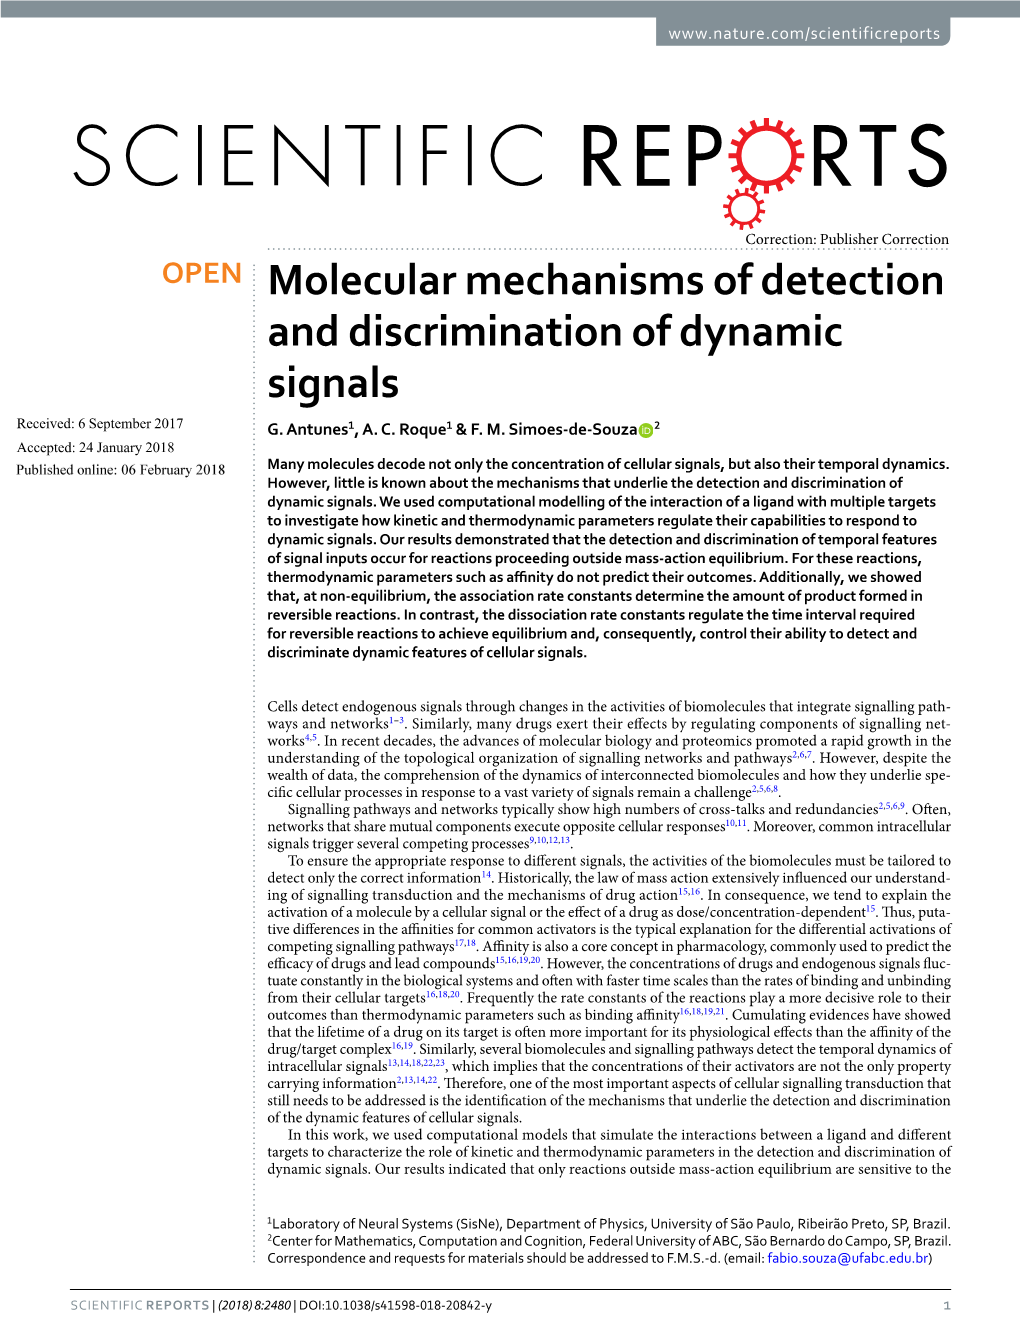 Molecular Mechanisms of Detection and Discrimination of Dynamic Signals Received: 6 September 2017 G